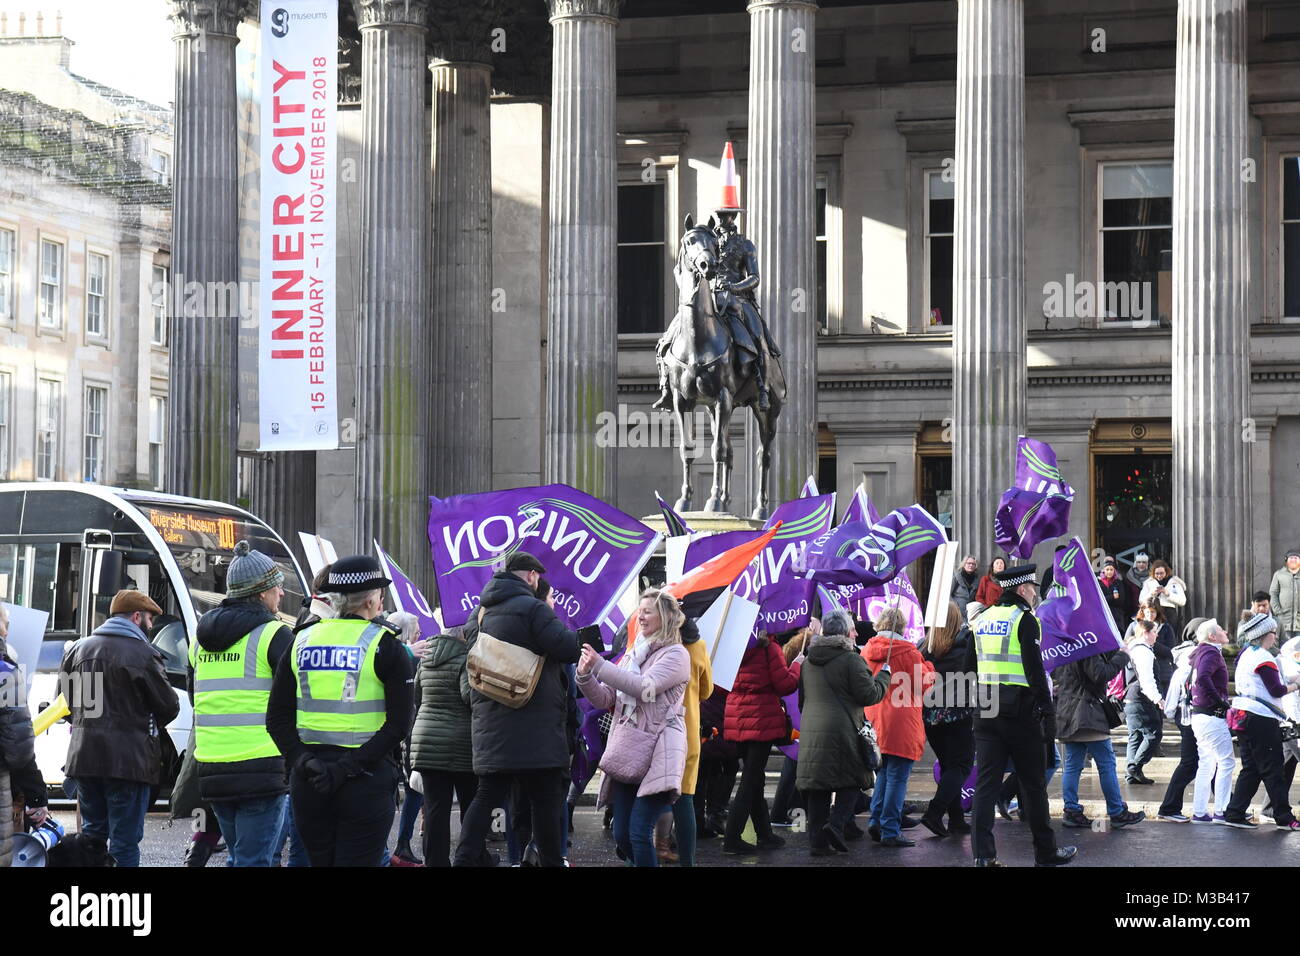 Glasgow, Scotland, UK - 10 February 2018: Women (and men) demonstrating at an equal pay protest in Glasgow, led by women dressed as suffragettes Stock Photo